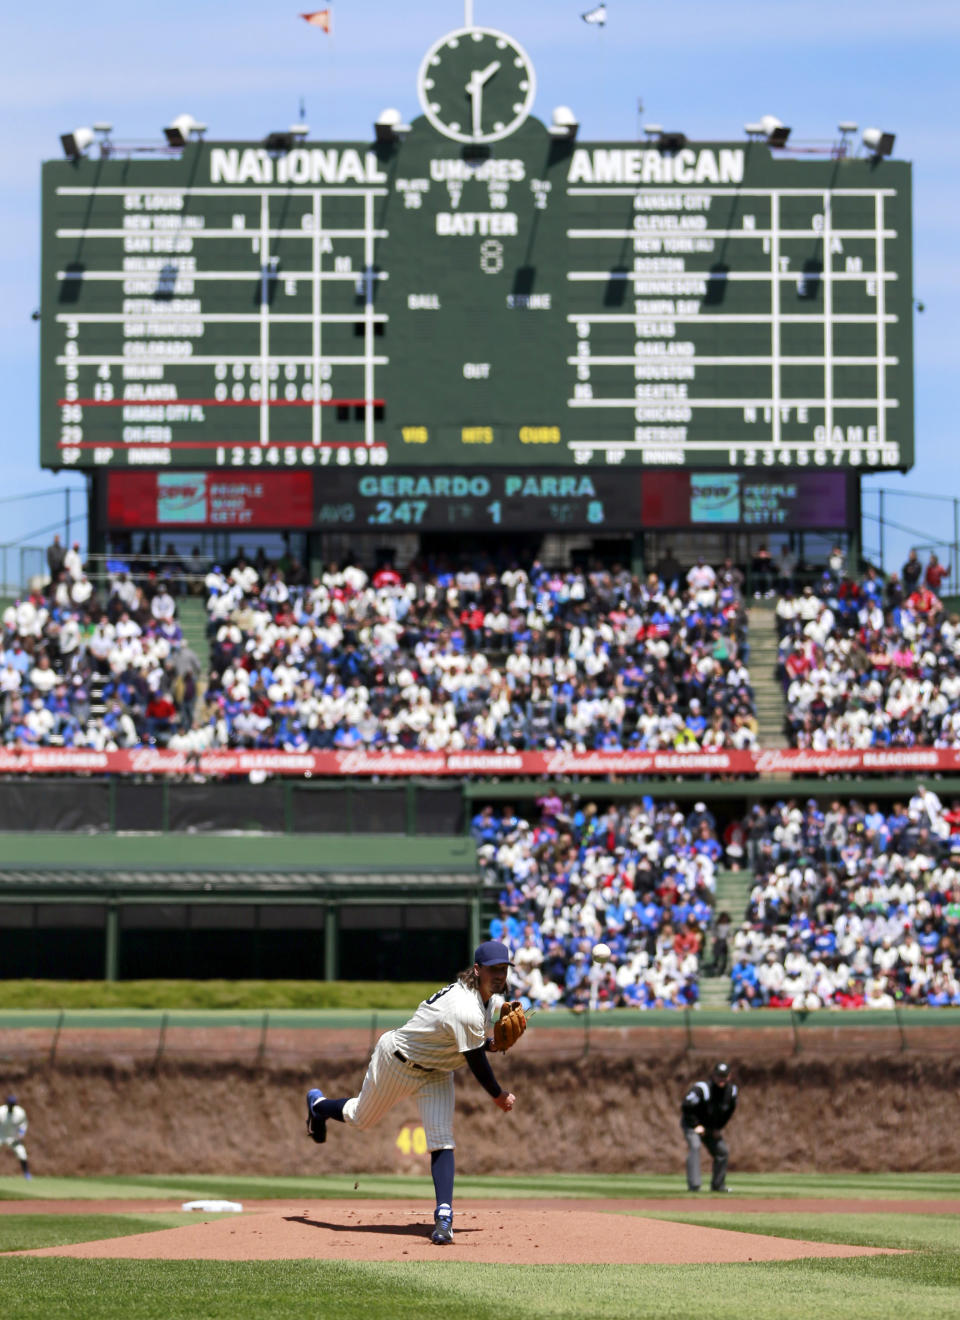 Chicago Cubs starting pitcher Jeff Samardzija delivers a pitch during the first inning at the 100th anniversary of the first baseball game at Wrigley Field against the Arizona Diamondbacks, Wednesday, April 23, 2014, in Chicago. (AP Photo/Charles Rex Arbogast)